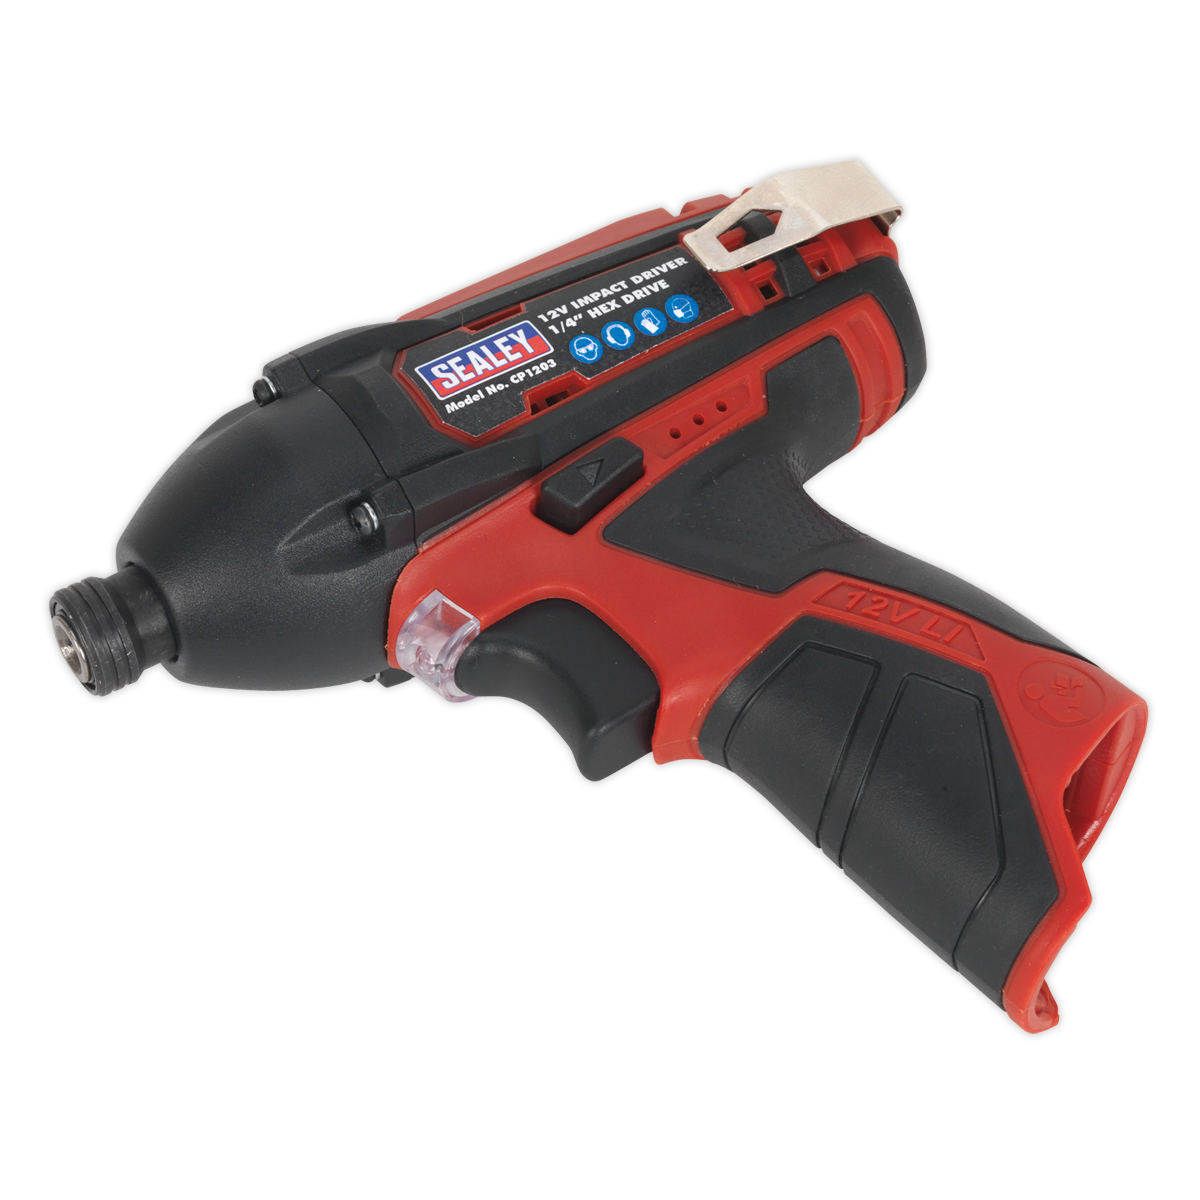 Sealey CP1203 Cordless Impact Driver 1/4"Hex Drive 80Nm 12V Li-ion- Body Only